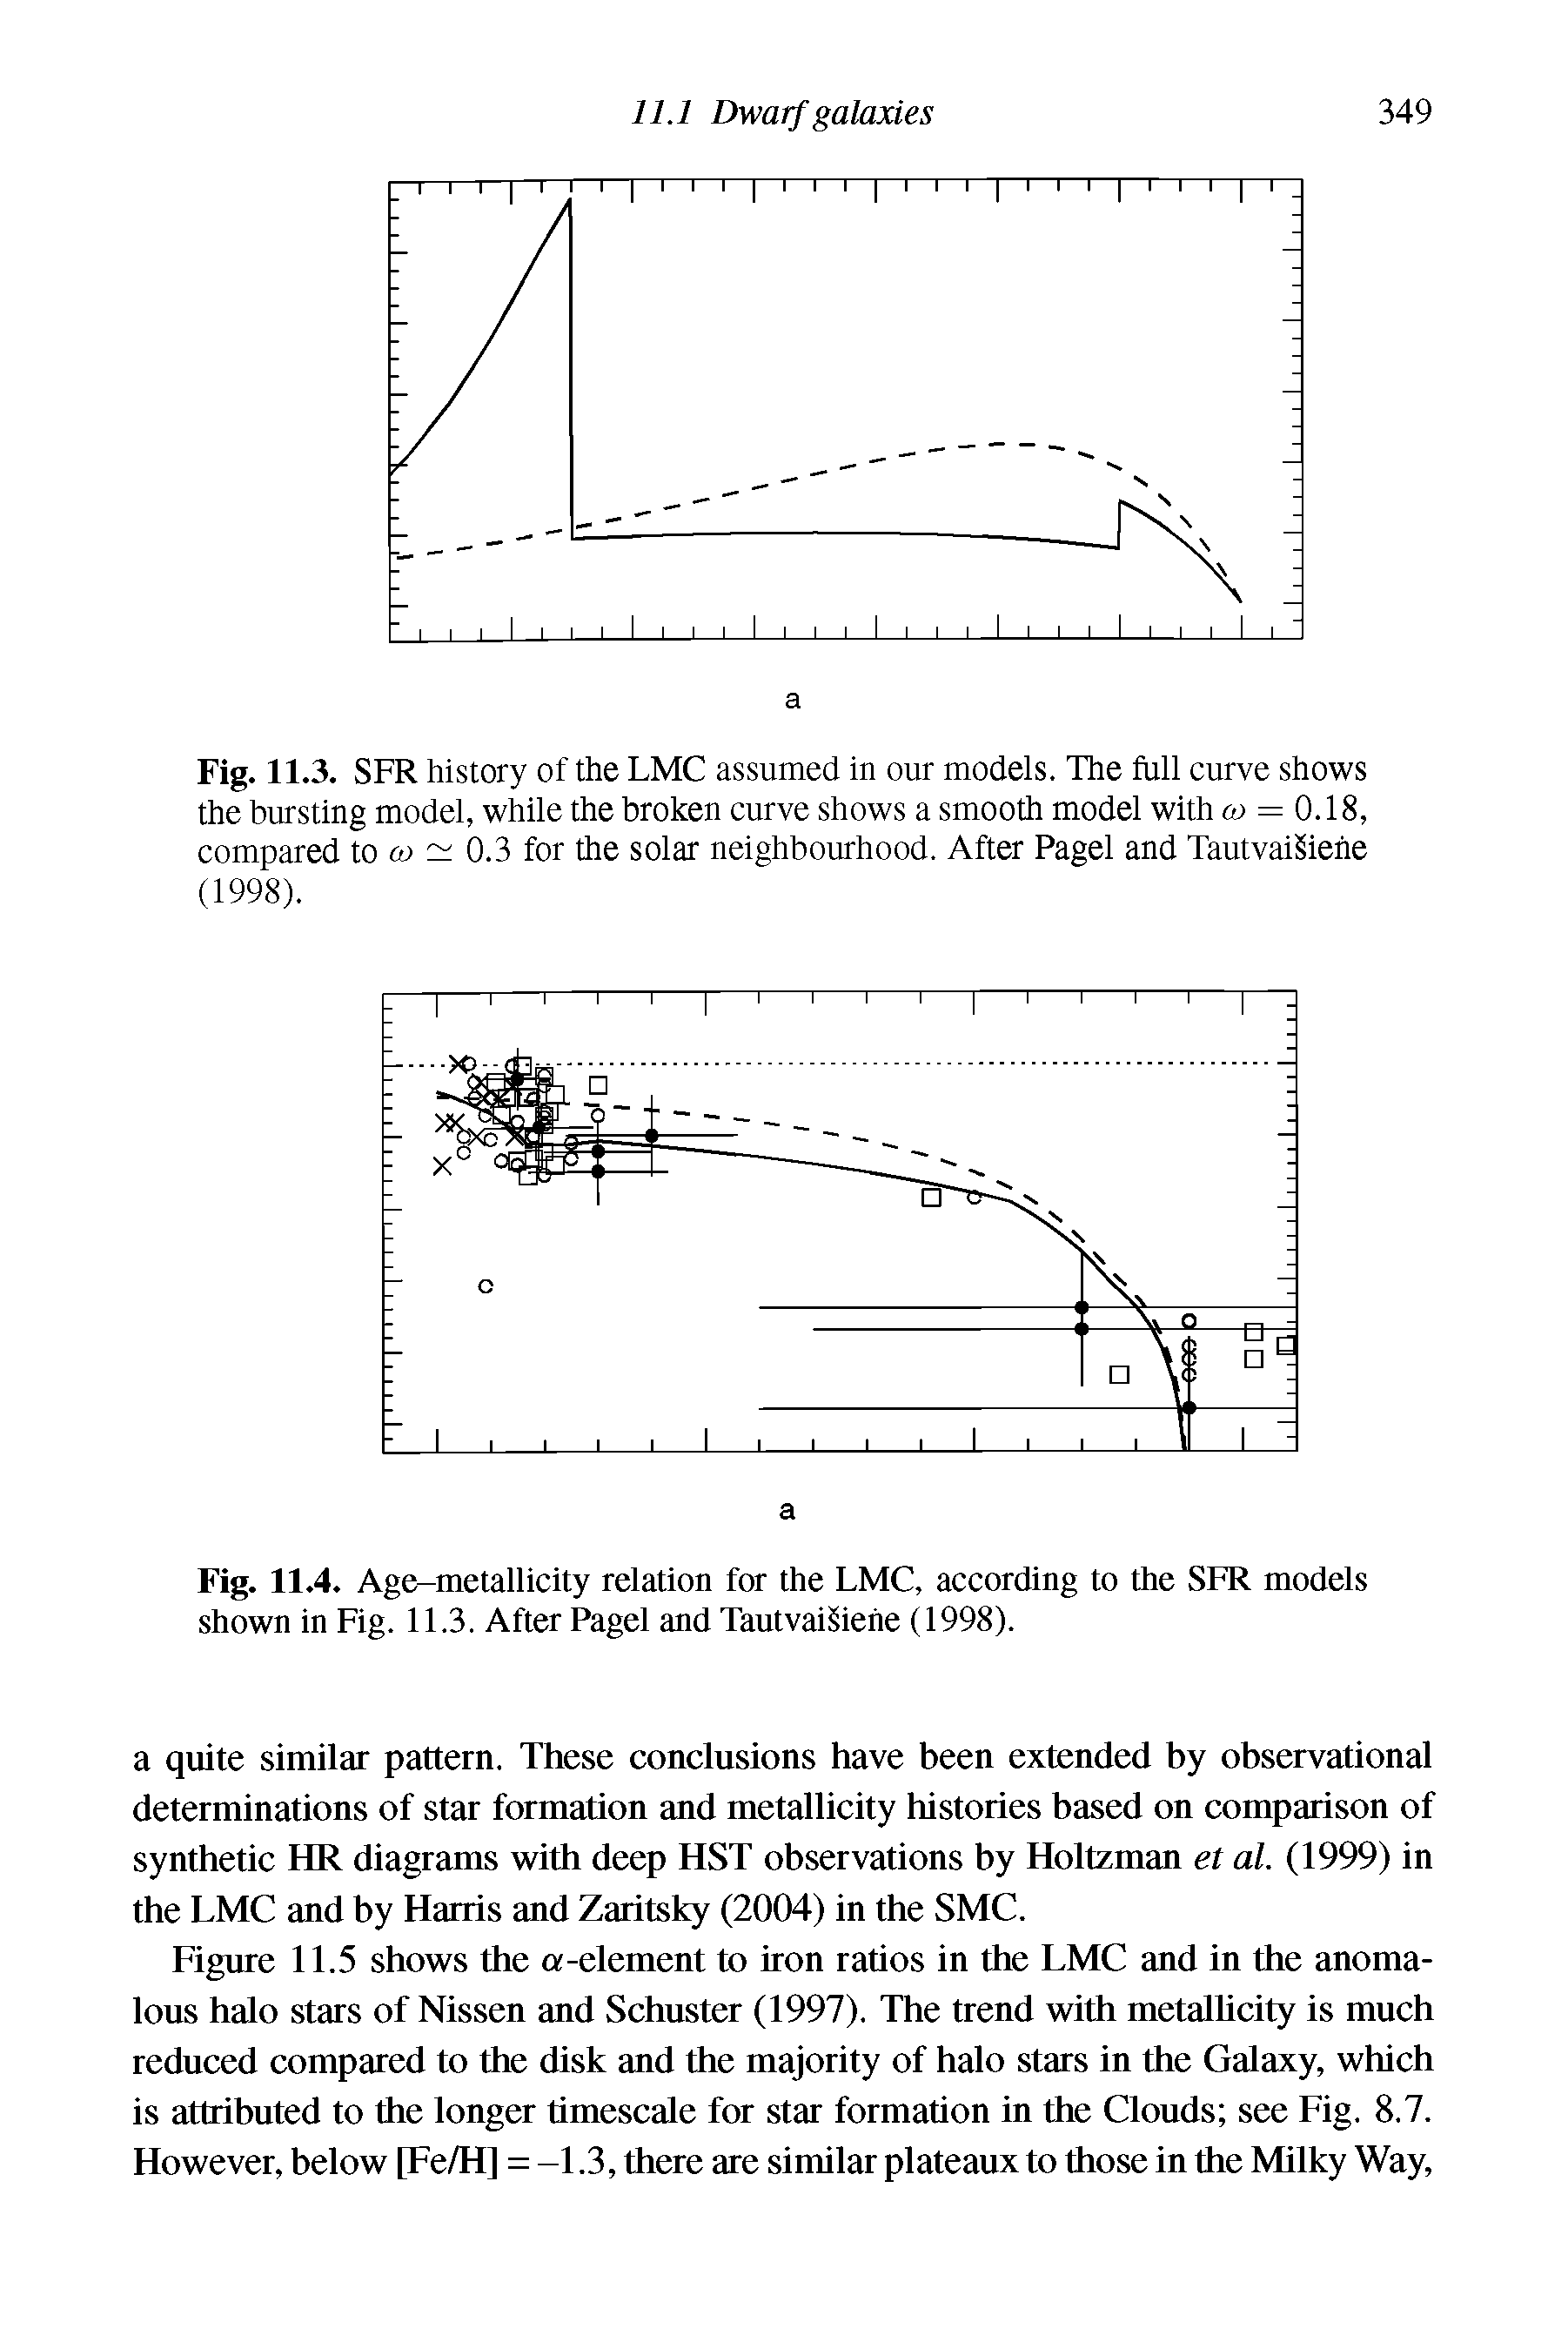 Fig. 11.3. SFR history of the LMC assumed in our models. The full curve shows the bursting model, while the broken curve shows a smooth model with cw = 0.18, compared to co 0.3 for the solar neighbourhood. After Pagel and TautvaiSiehe (1998).